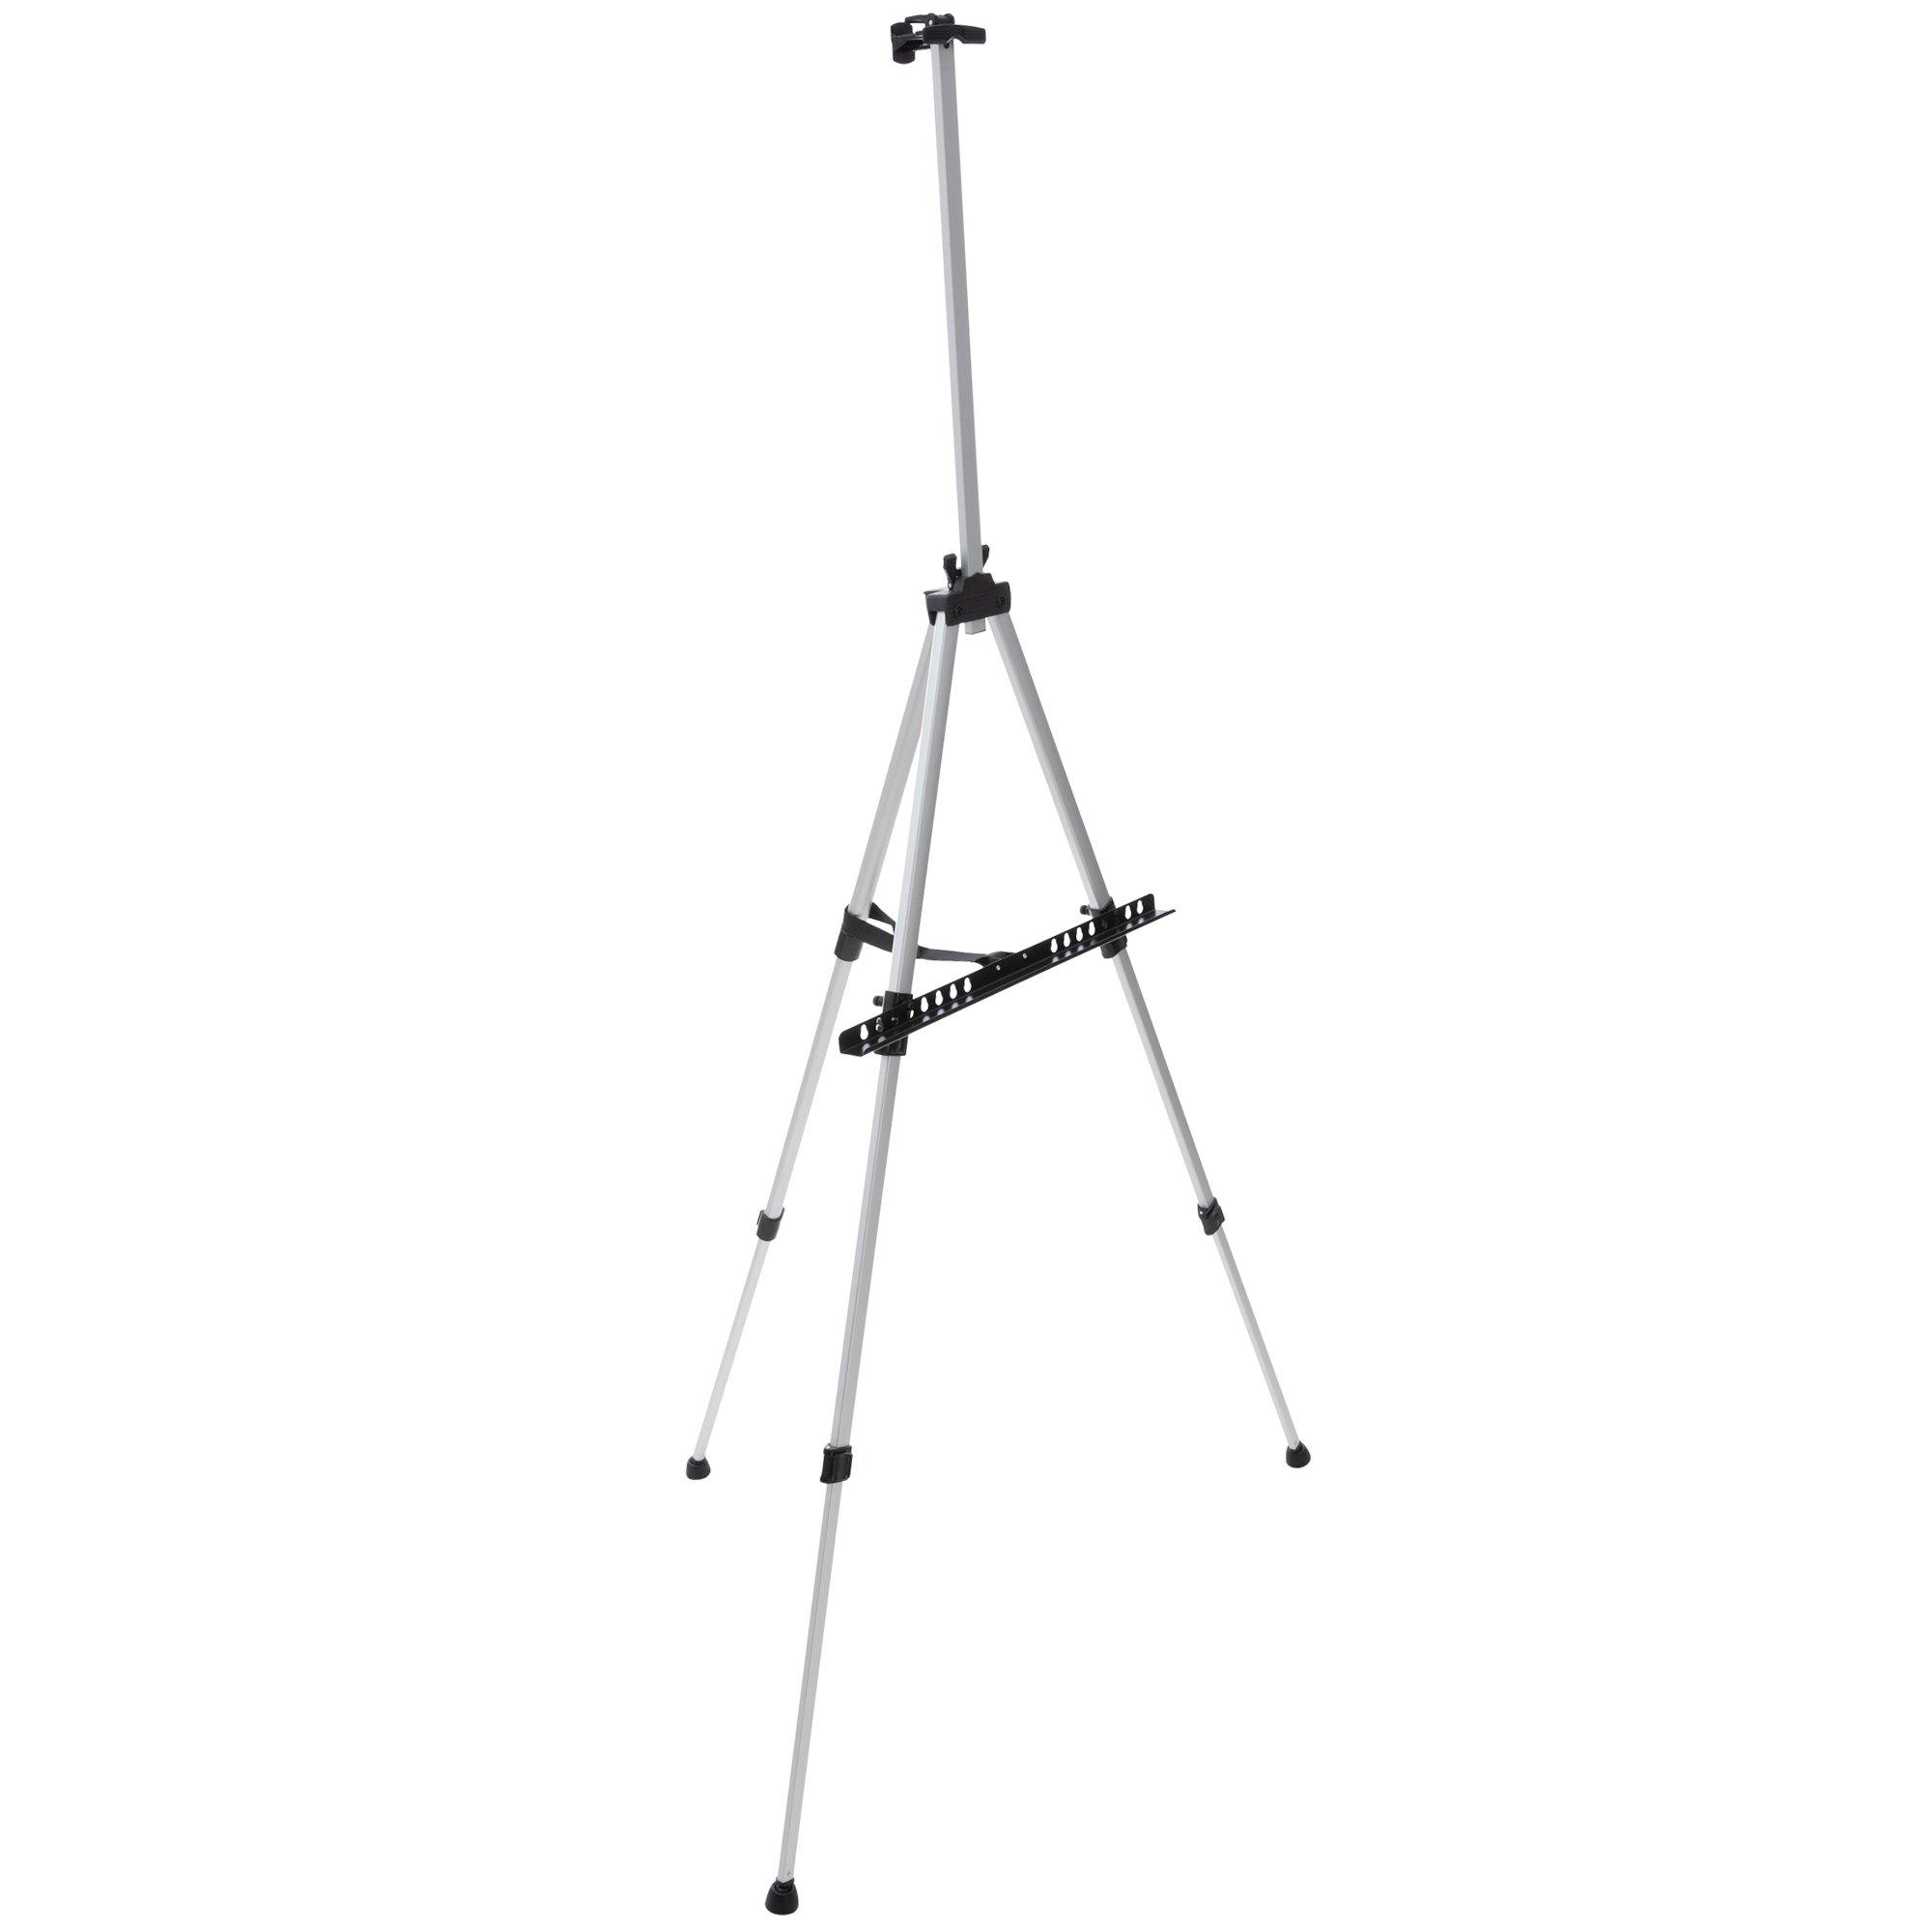  Daler-Rowney Simply Field Easel - Aluminum Easel Stand for  Artists and Students of All Ages - Plein Air Art Easel with Black Storage  Bag - Canvas Stand for Painting and Drawing 